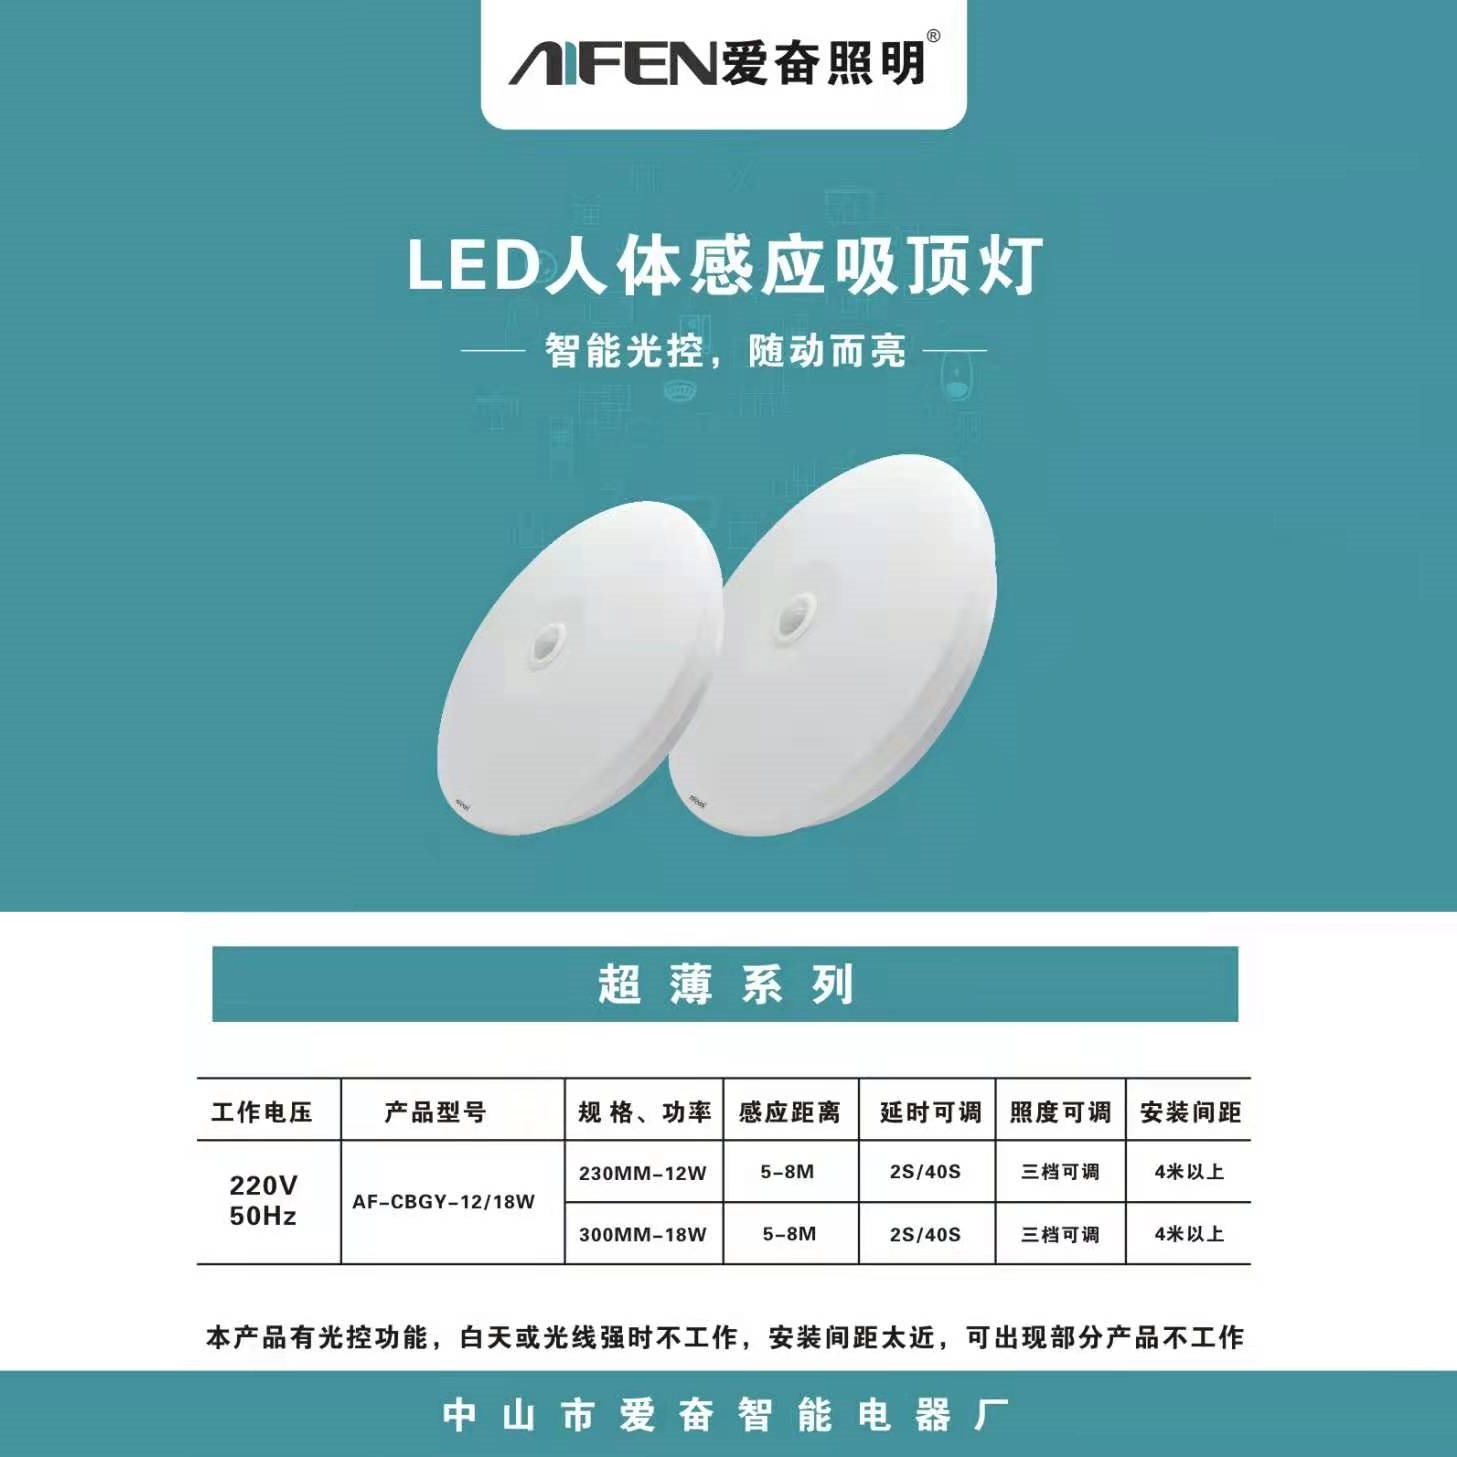 Ultrathin series LED human body induction ceiling lamp